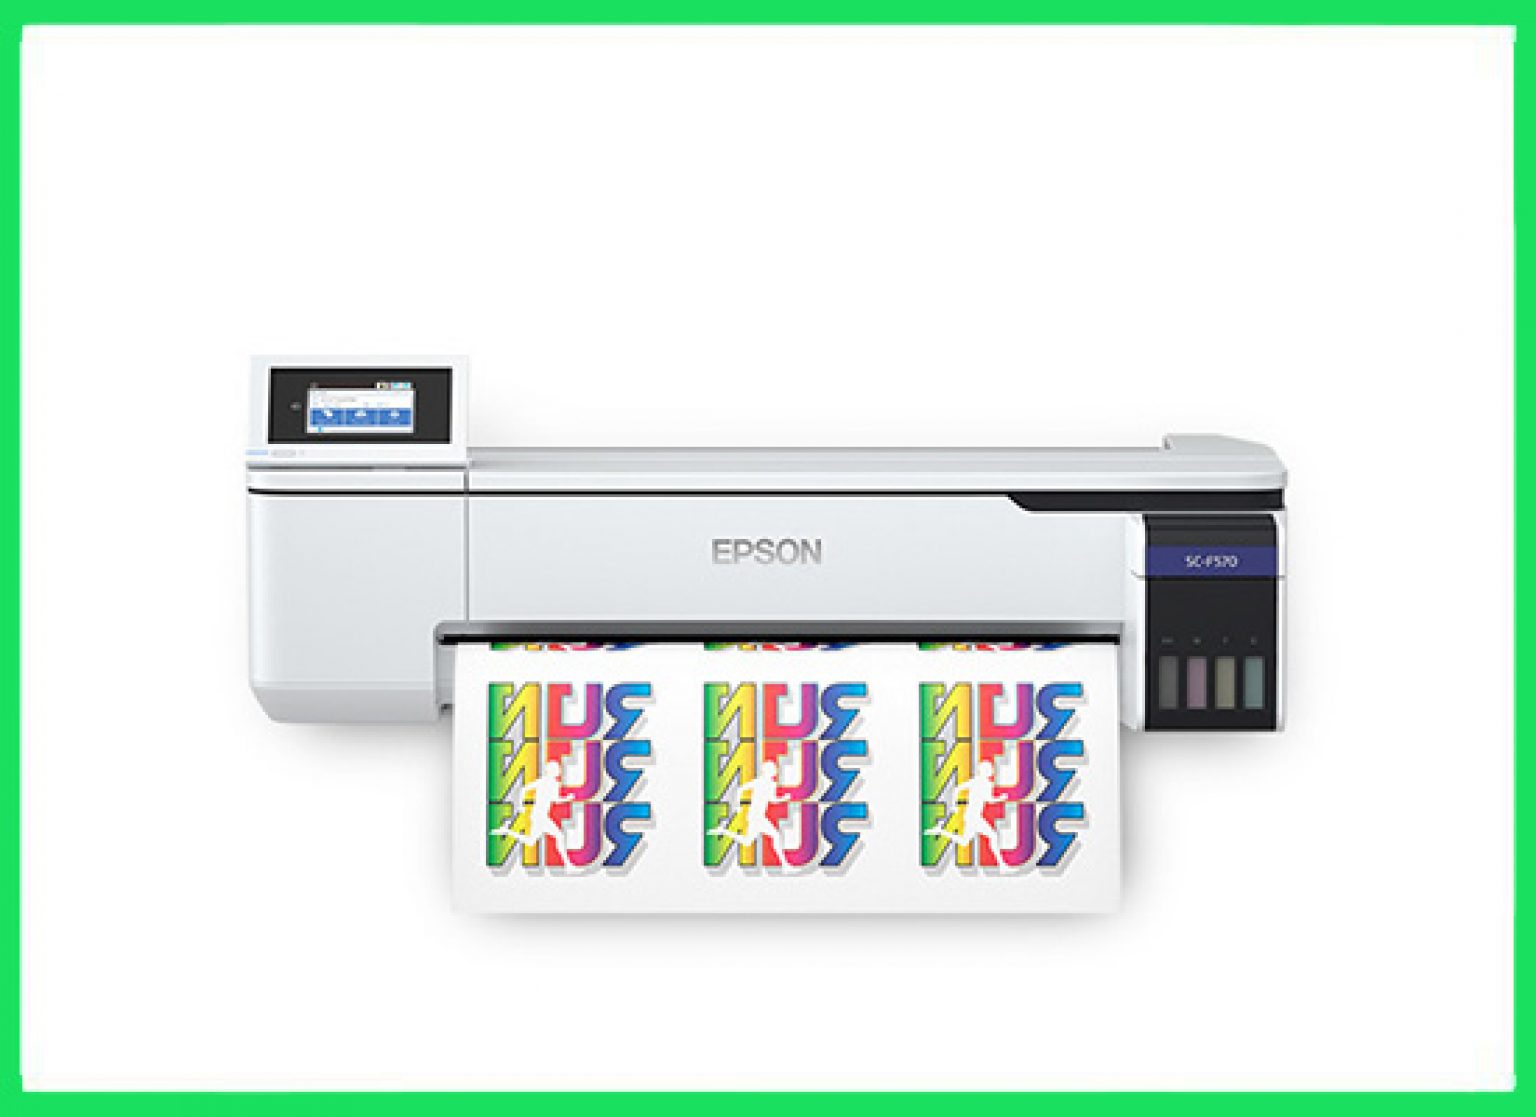 Is The Epson Surecolor F570 Dye Sublimation Printer Worth It Buyers Guide 2213